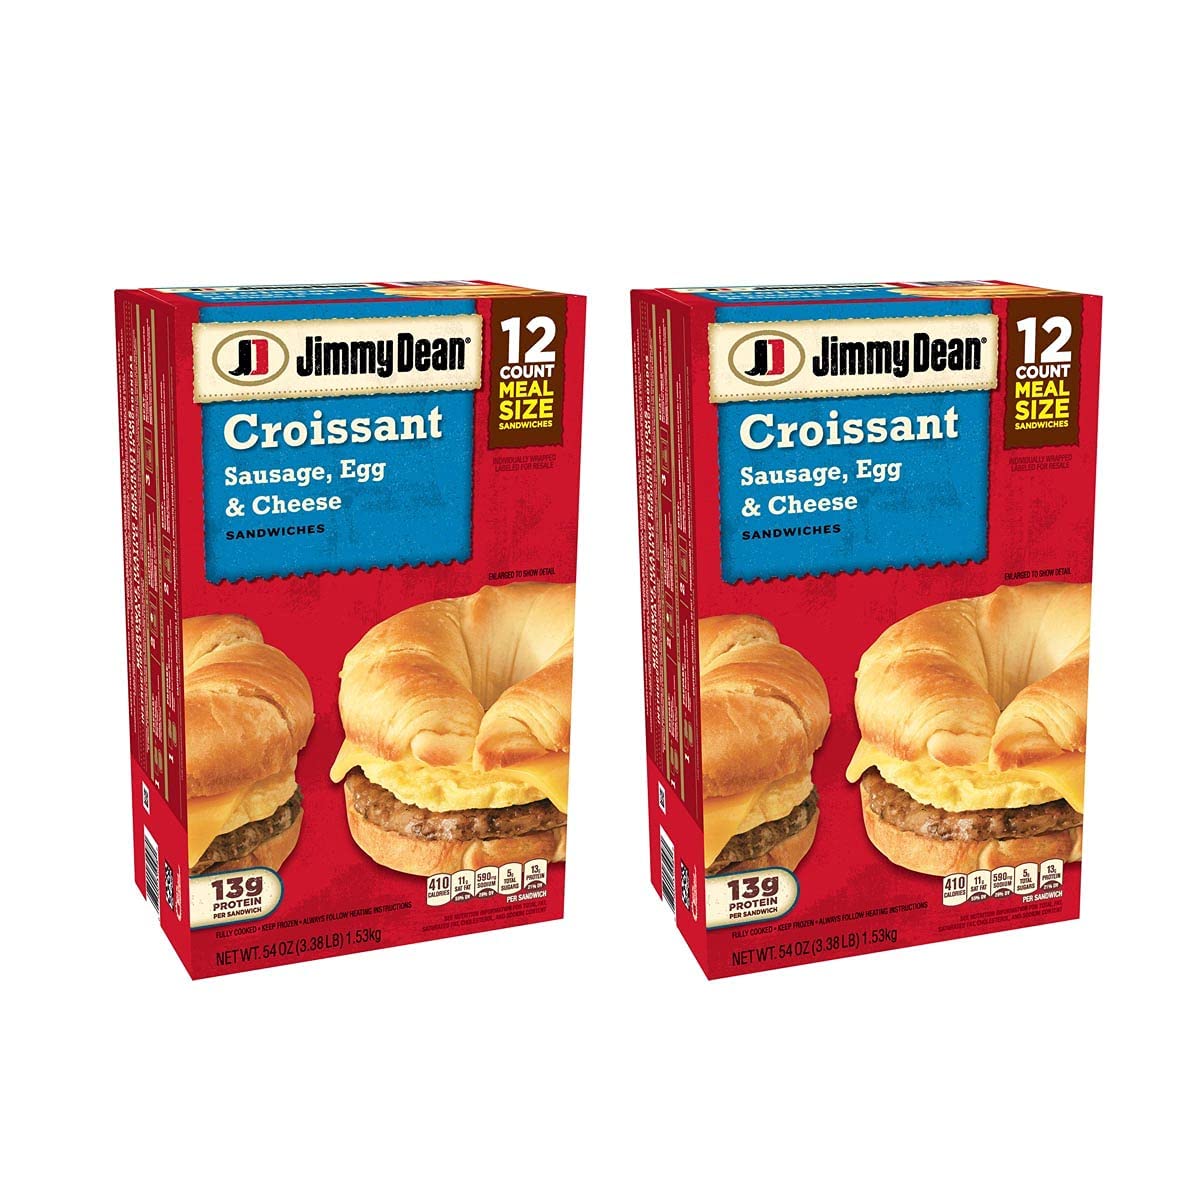 Jimmy Dean Croissant Sausage, Egg and Cheese - Frozen Sandwiches - Breakfast On-the-Go